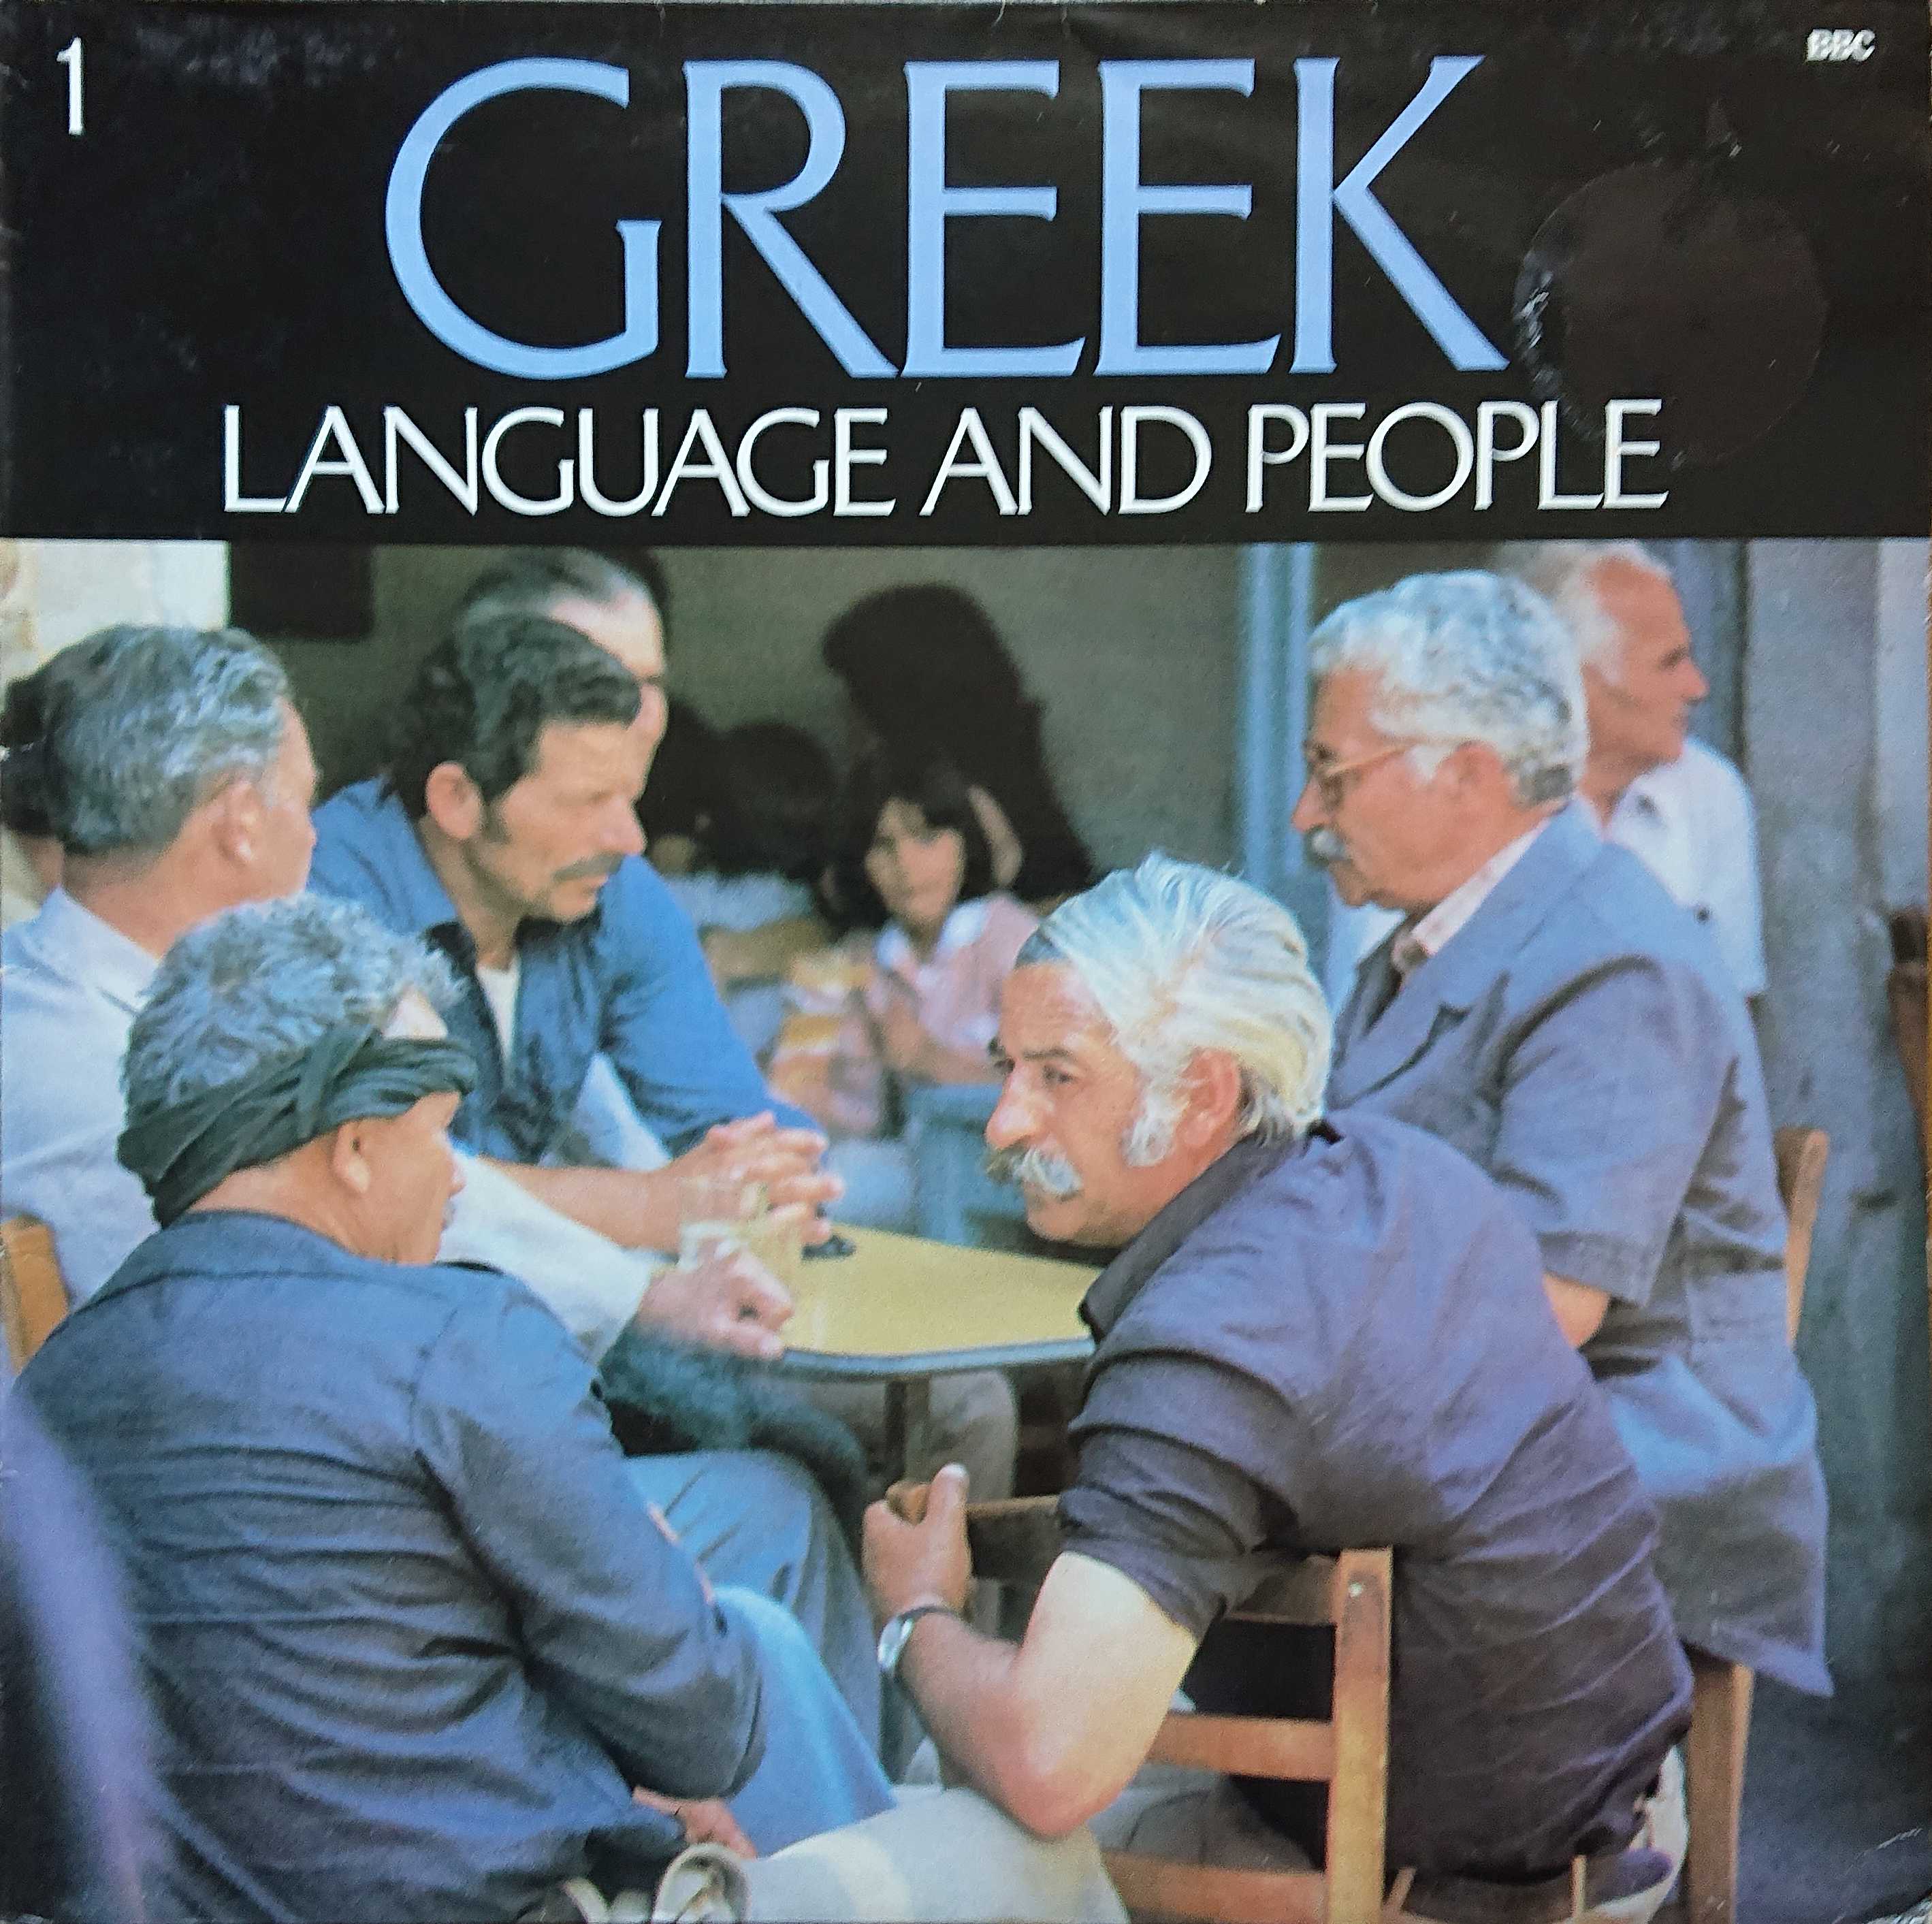 Picture of OP 269 Greek language and people by artist David A. Hardy from the BBC albums - Records and Tapes library